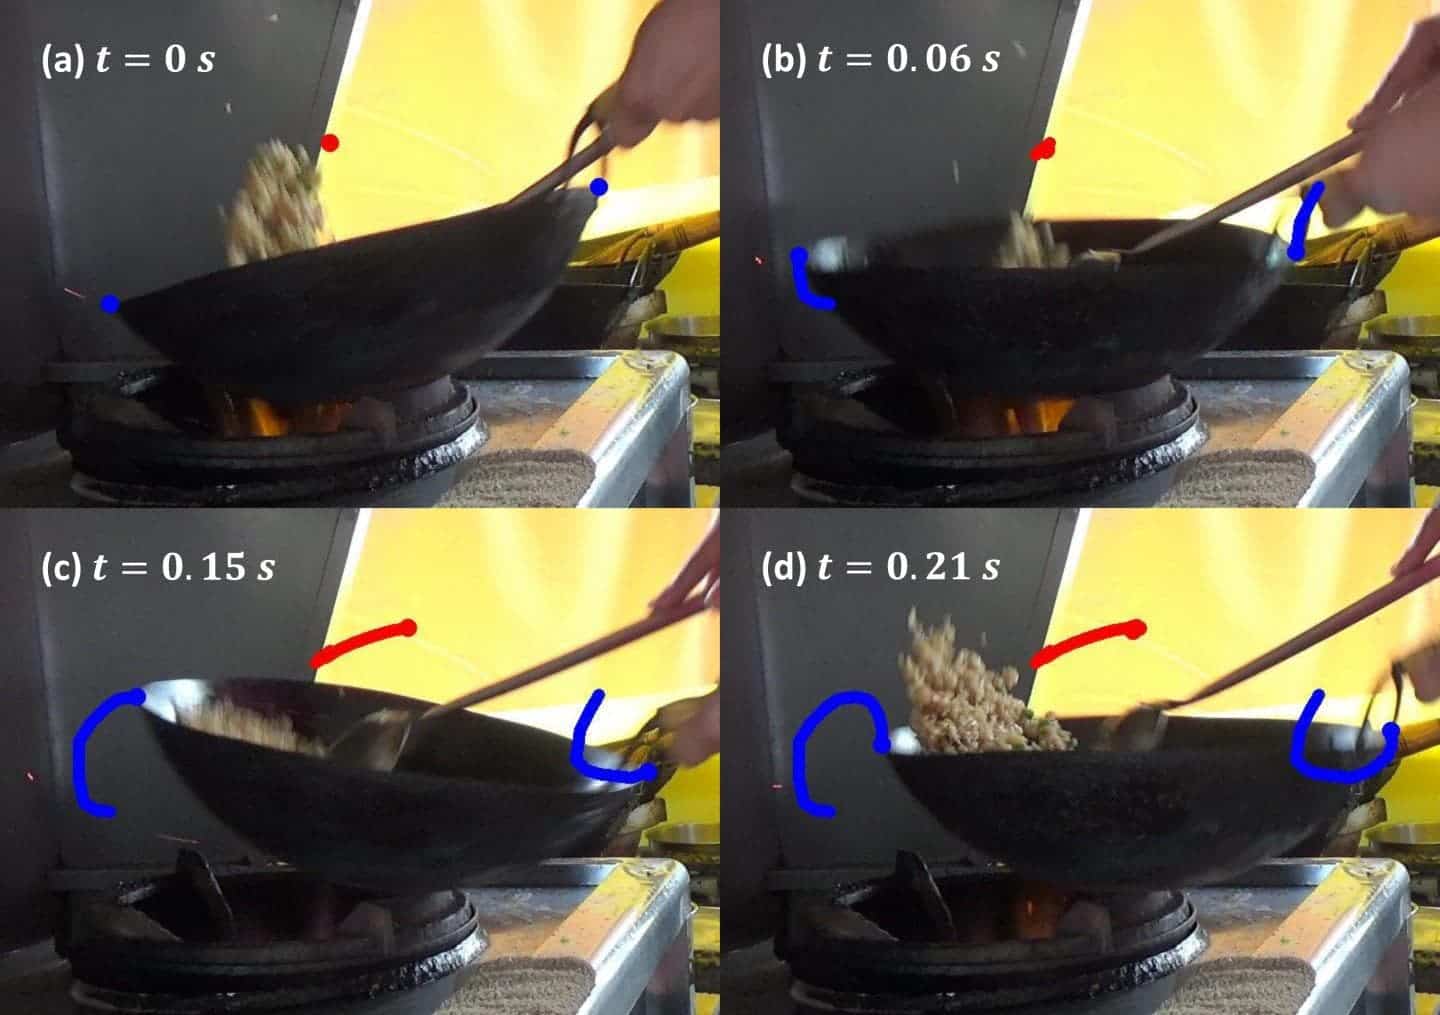 Illustration of the movements of the wok and rice during four phases of a 0.322-second cycle: (a) The chef tilts the front end of the wok up while moving it backward to catch the falling rice. (b) The wok is at its farthest point from the chef (with zero translational velocity); most of the rice has landed. (c) The wok is pulled toward the chef as the front end is tilted down. (d) The back end of the wok is abruptly lowered leaving most of the rice airborne. Image credits: Ko and Hu.